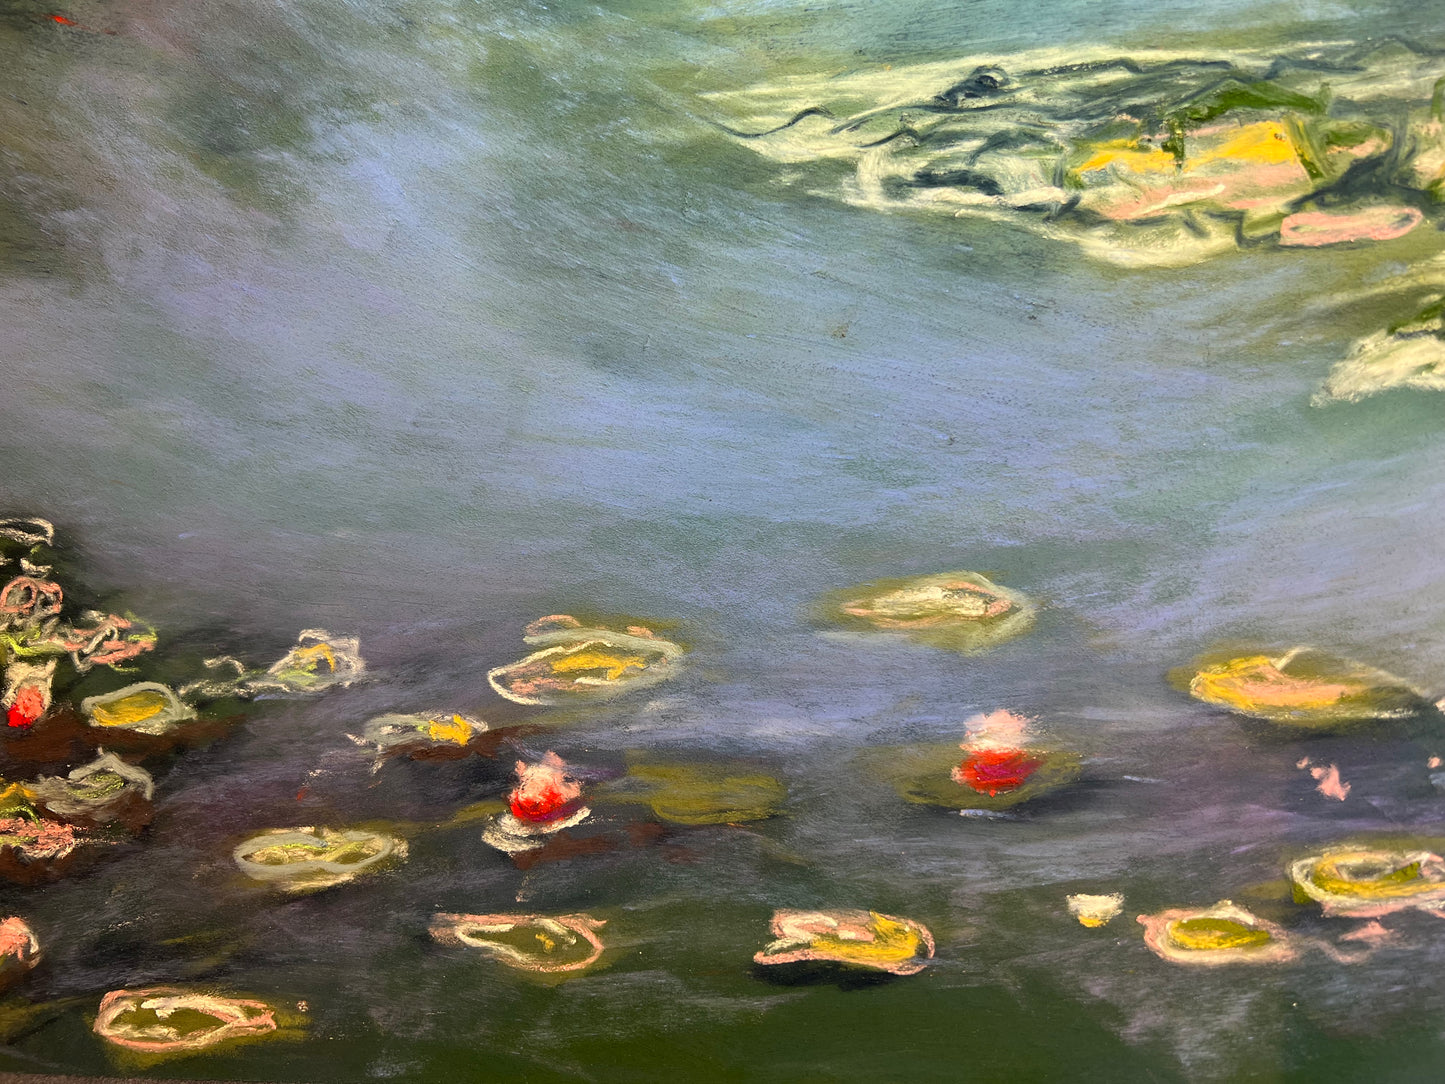 Water lilies 30x40cm